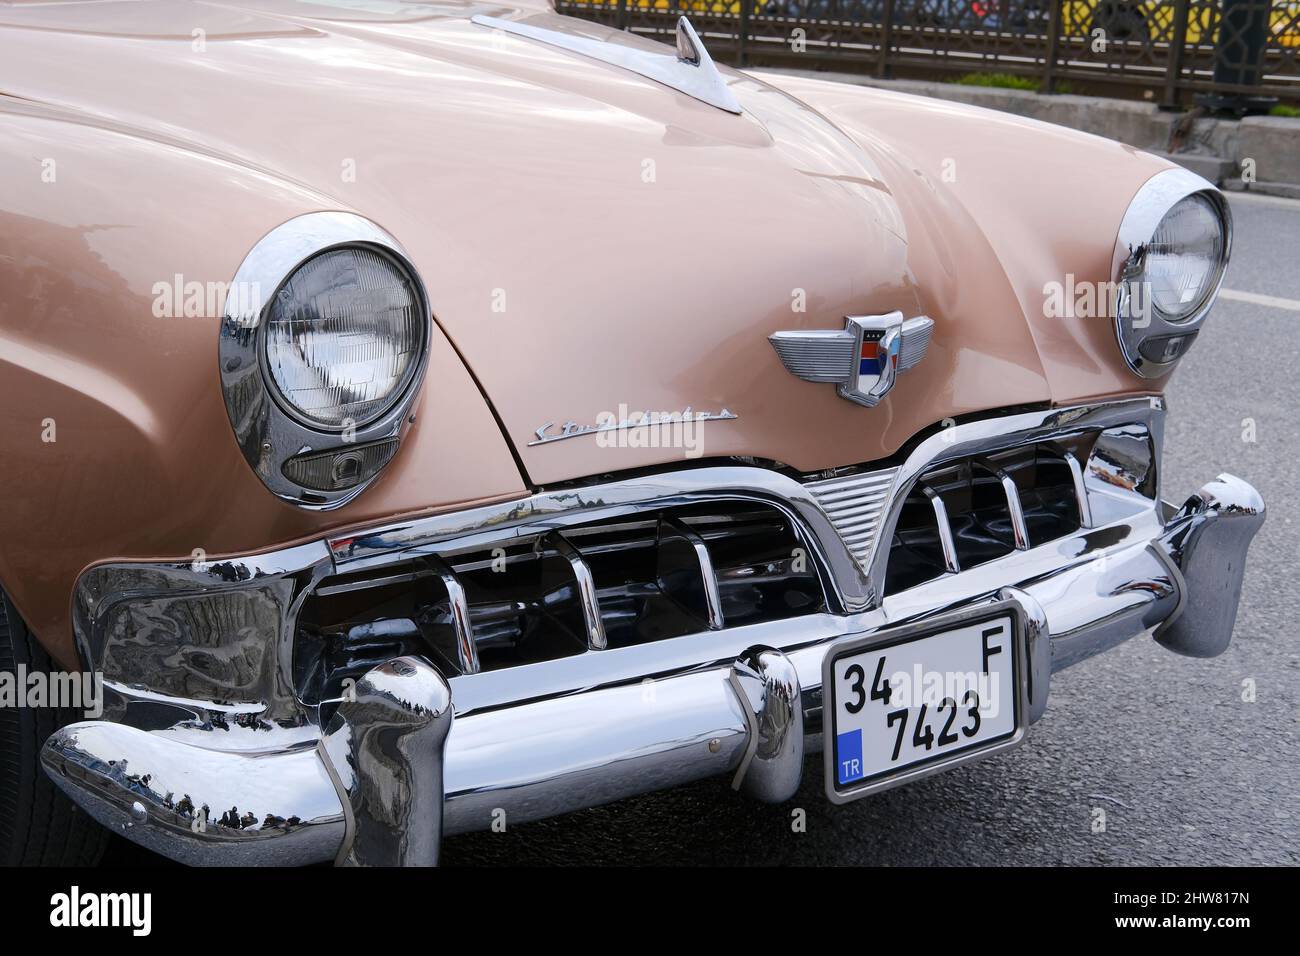 Istanbul, Turkey - February 26, 2022 : A vintage but in good condition Studebaker, which is an American Vintage Car was parked on The Galata Bridge. Stock Photo